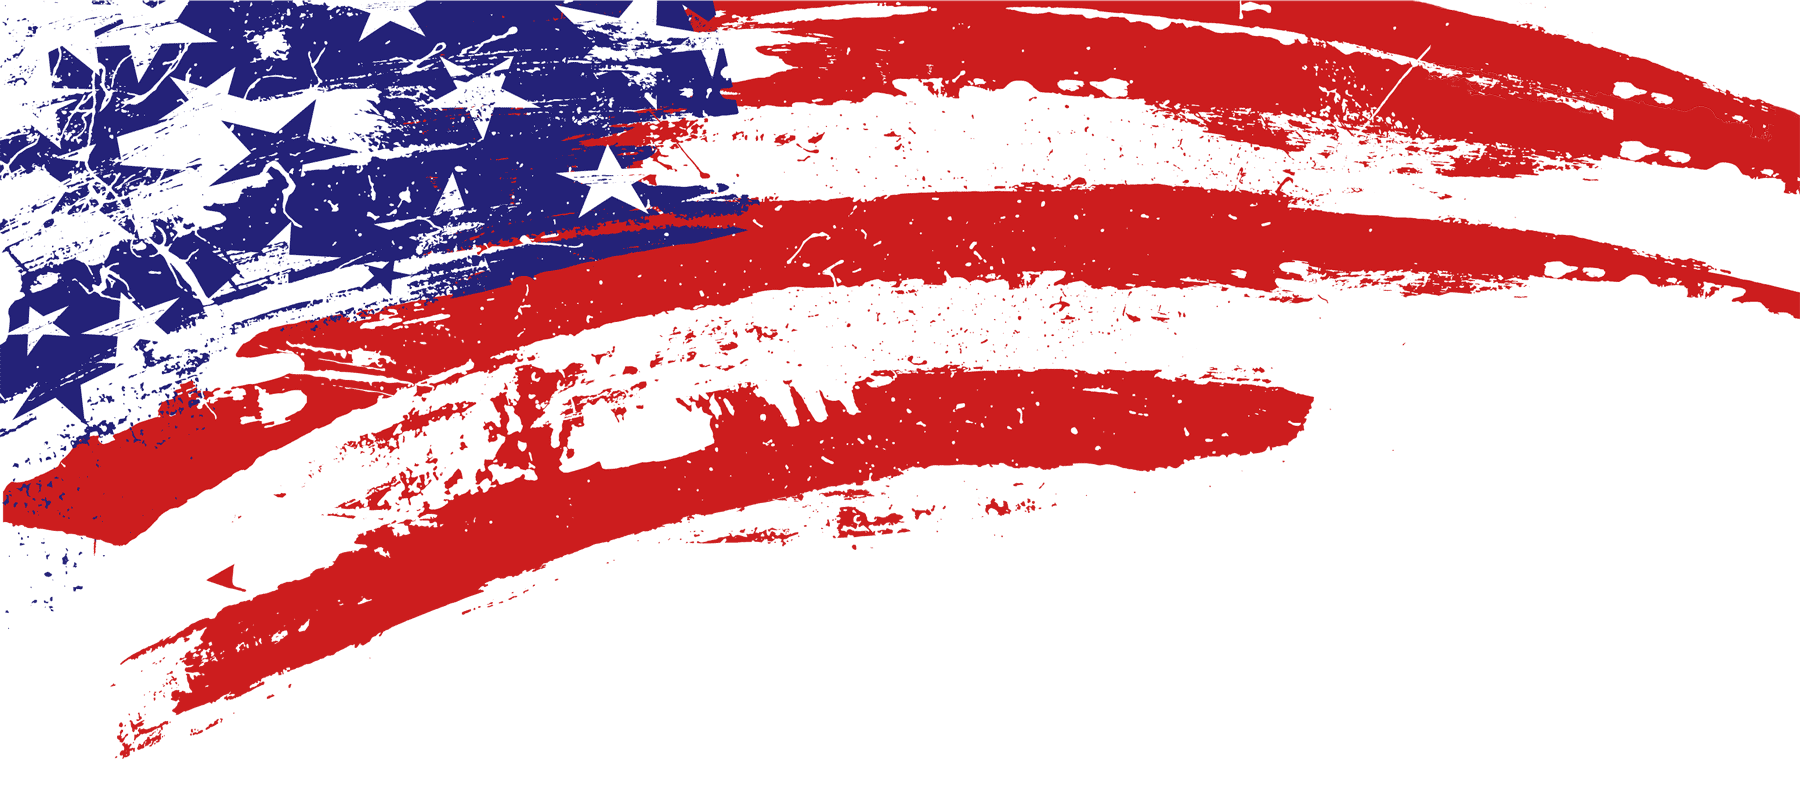 Gif images stripes flag. Flags clipart patriotic